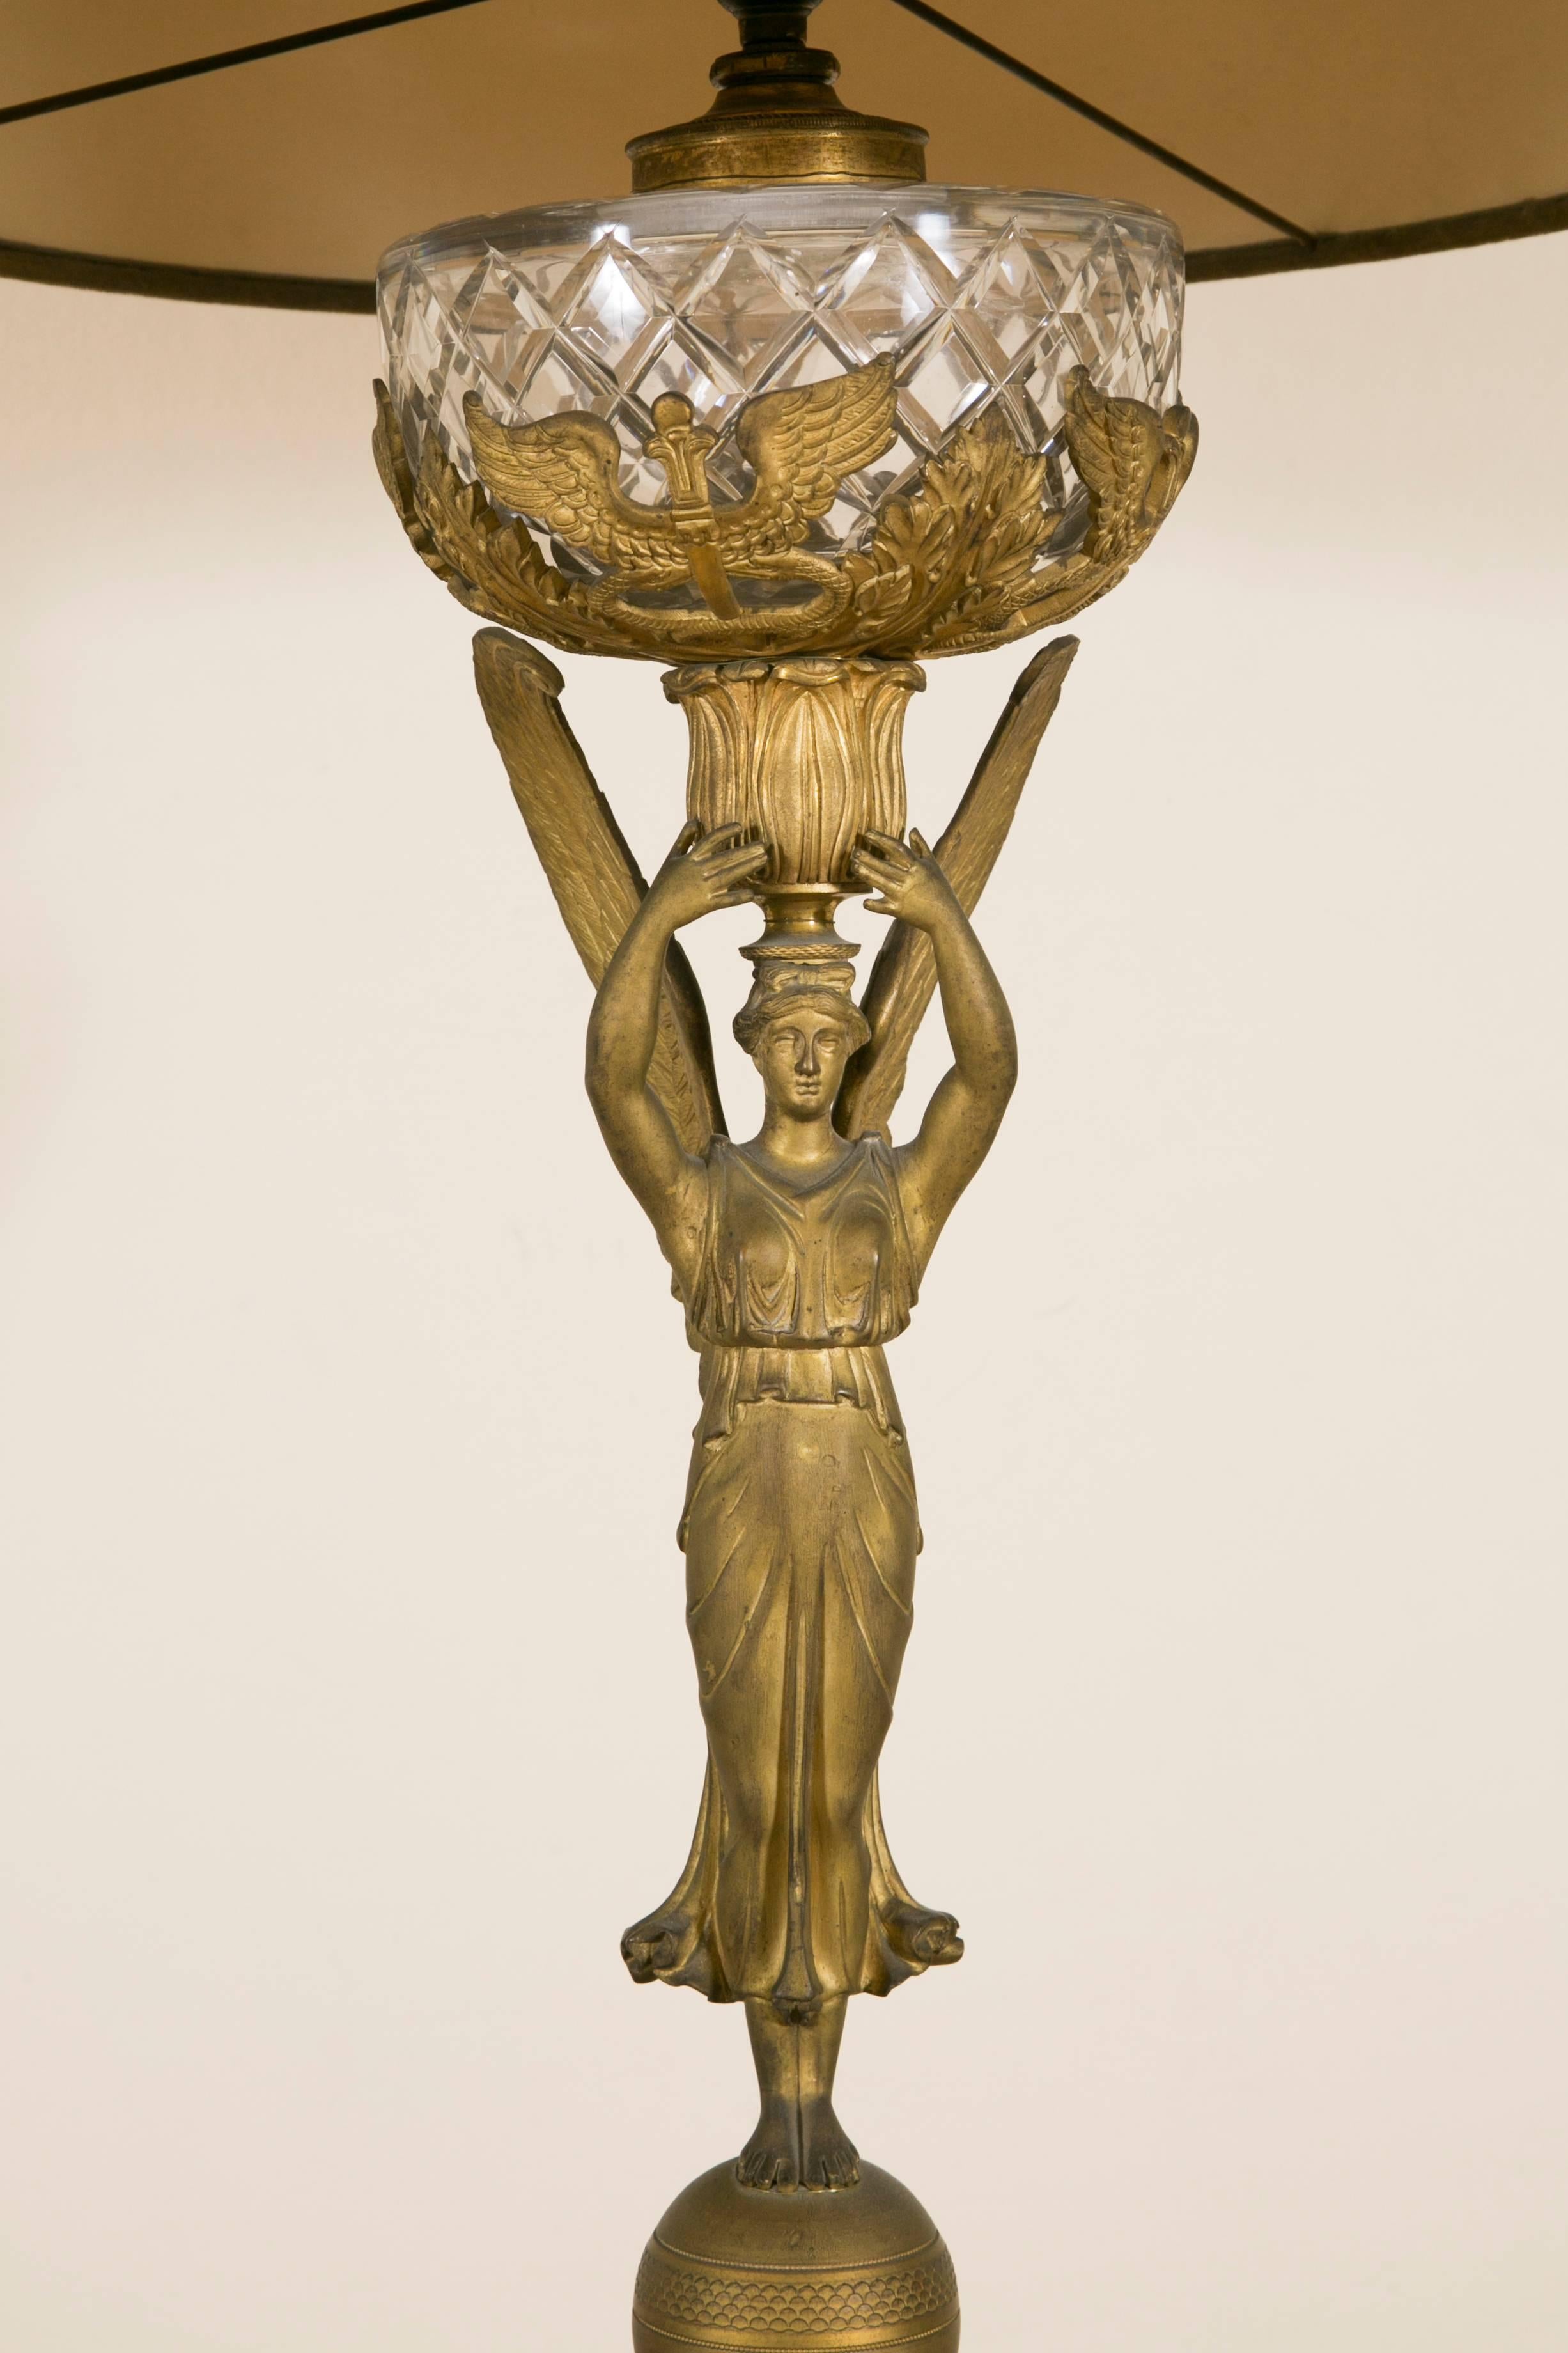 French Empire Gilt Bronze 19th Century Mounted Lamp Base